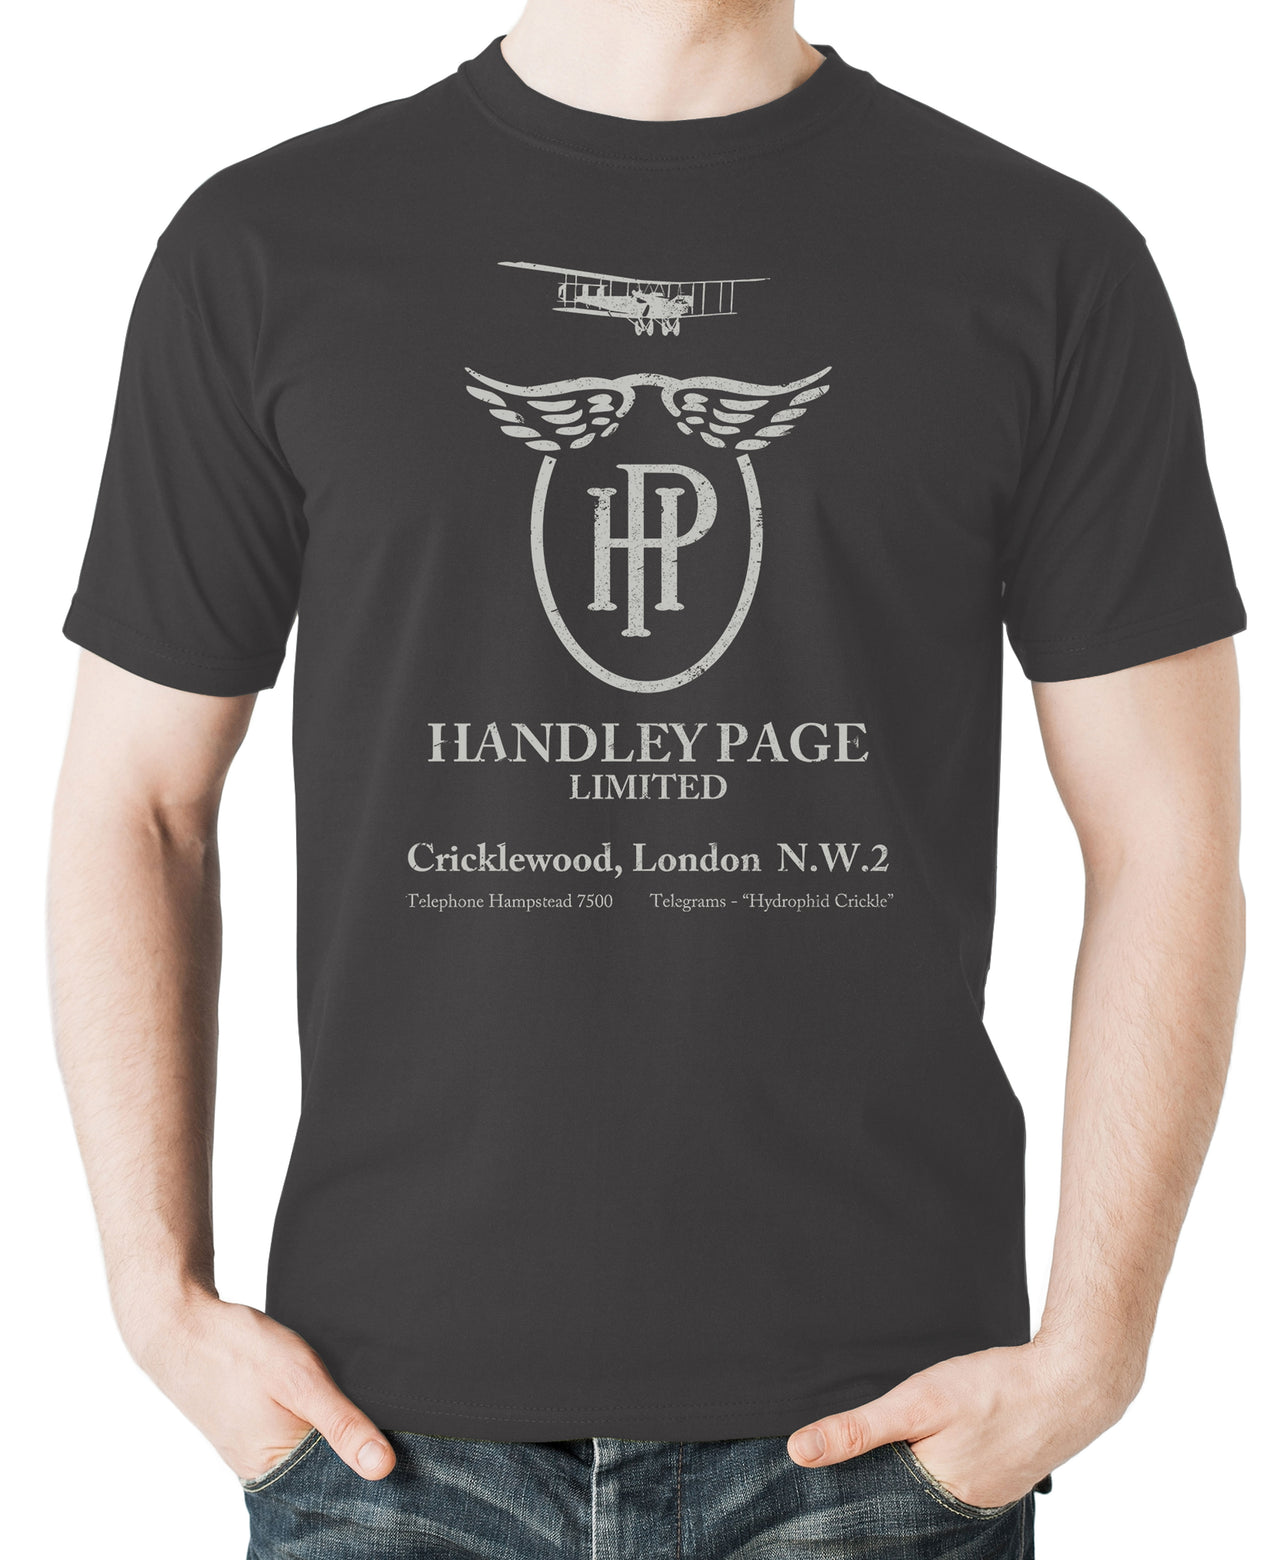 Handley Page - T-shirt